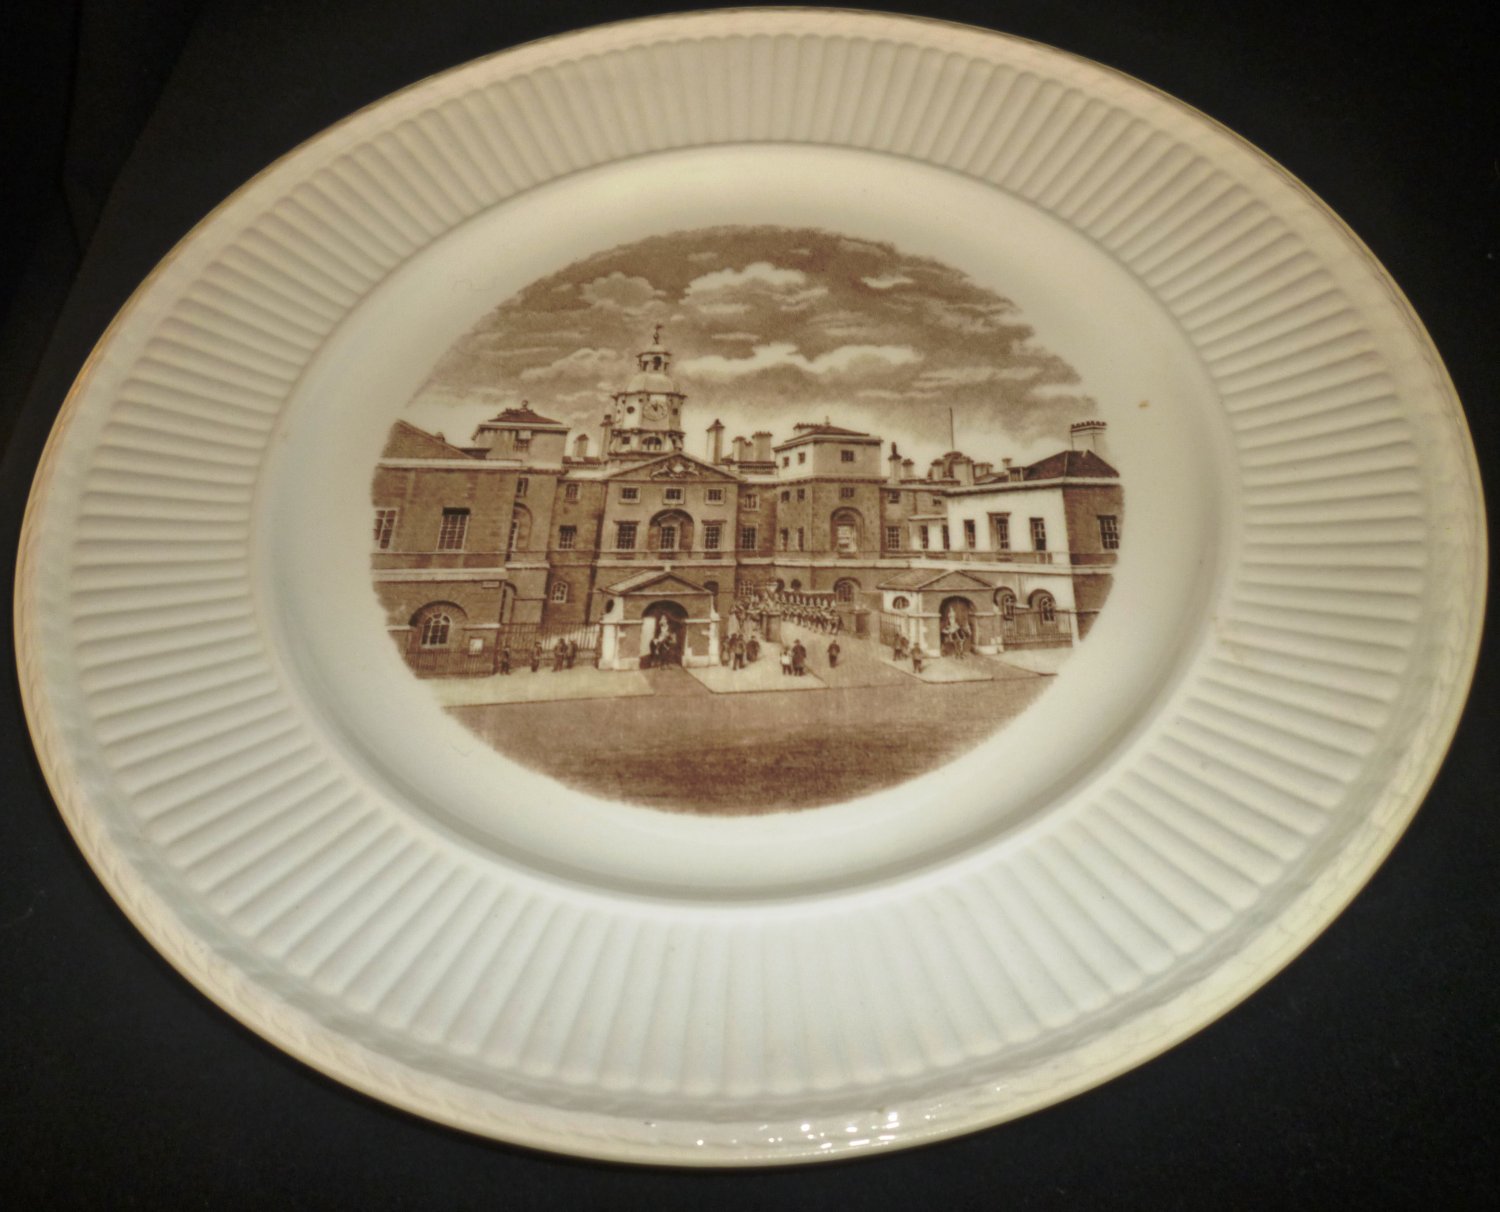 1941 SEPIA TRANSFER HISTORICAL PLATE WEDGWOOD OLD LONDON HORSE GUARDS ...